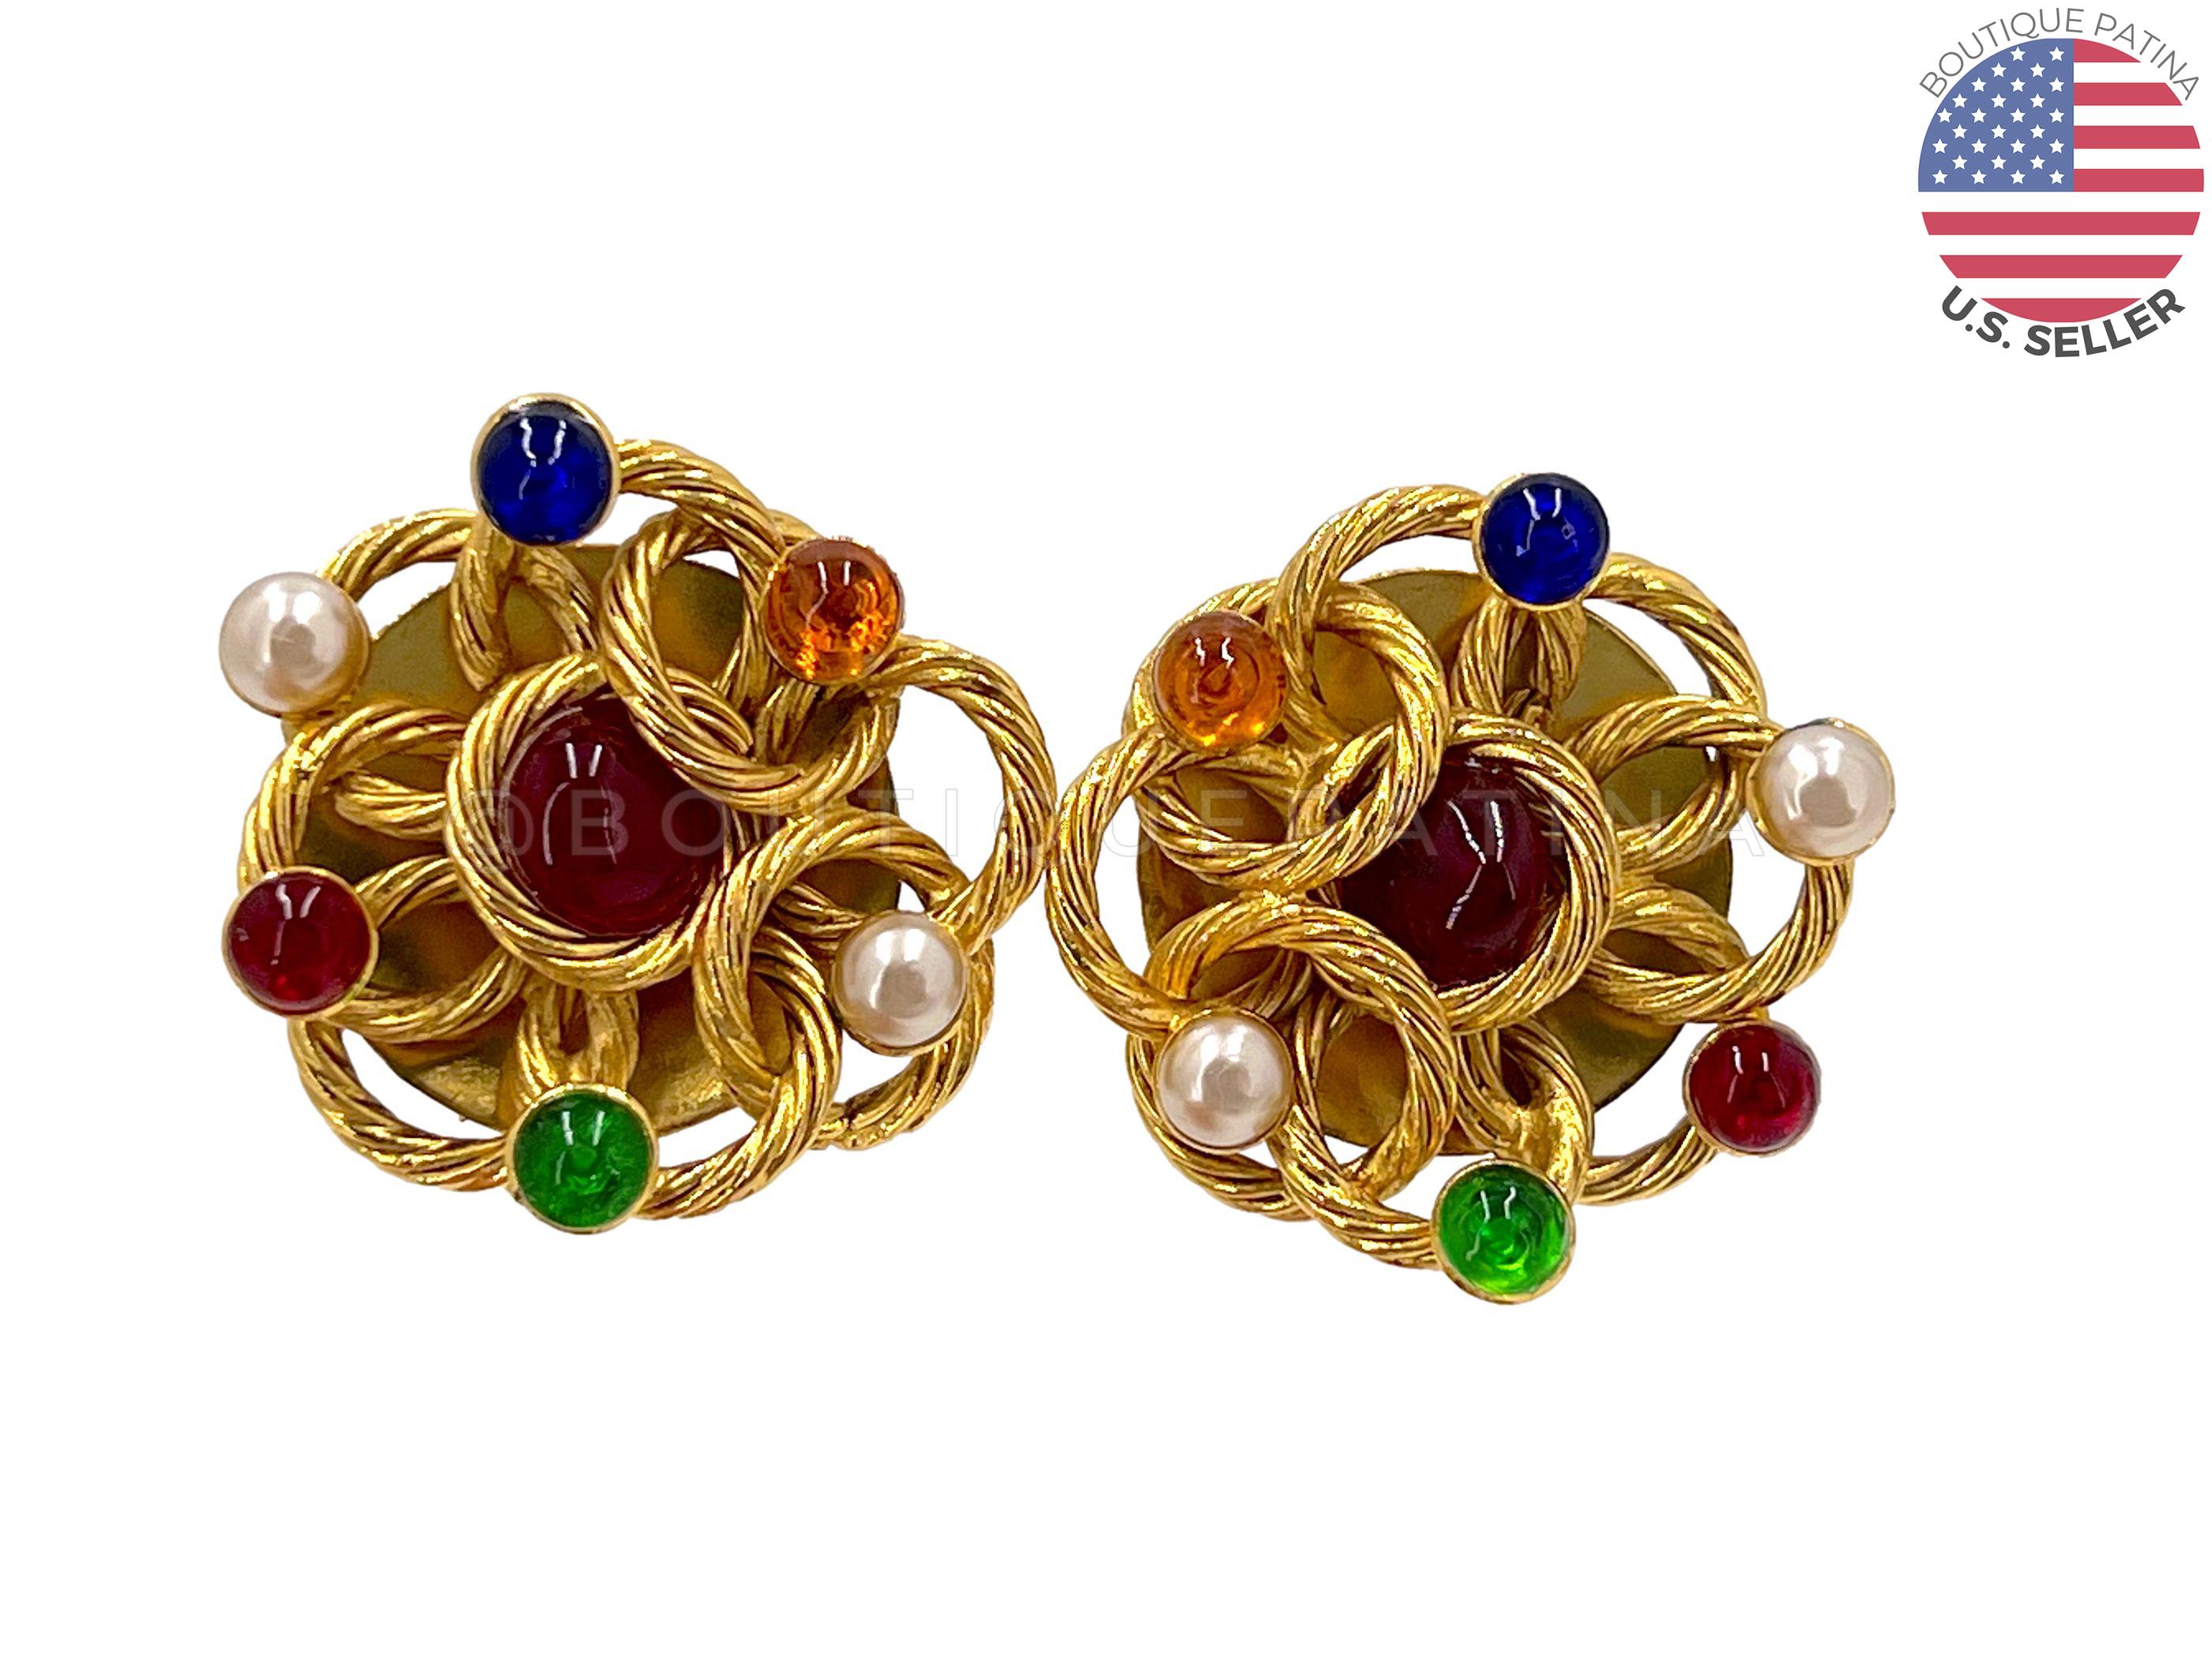 Chanel Vintage Collection 23 Colored Gripoix and Pearl Large Stud Earrings 65640 In Excellent Condition For Sale In Costa Mesa, CA